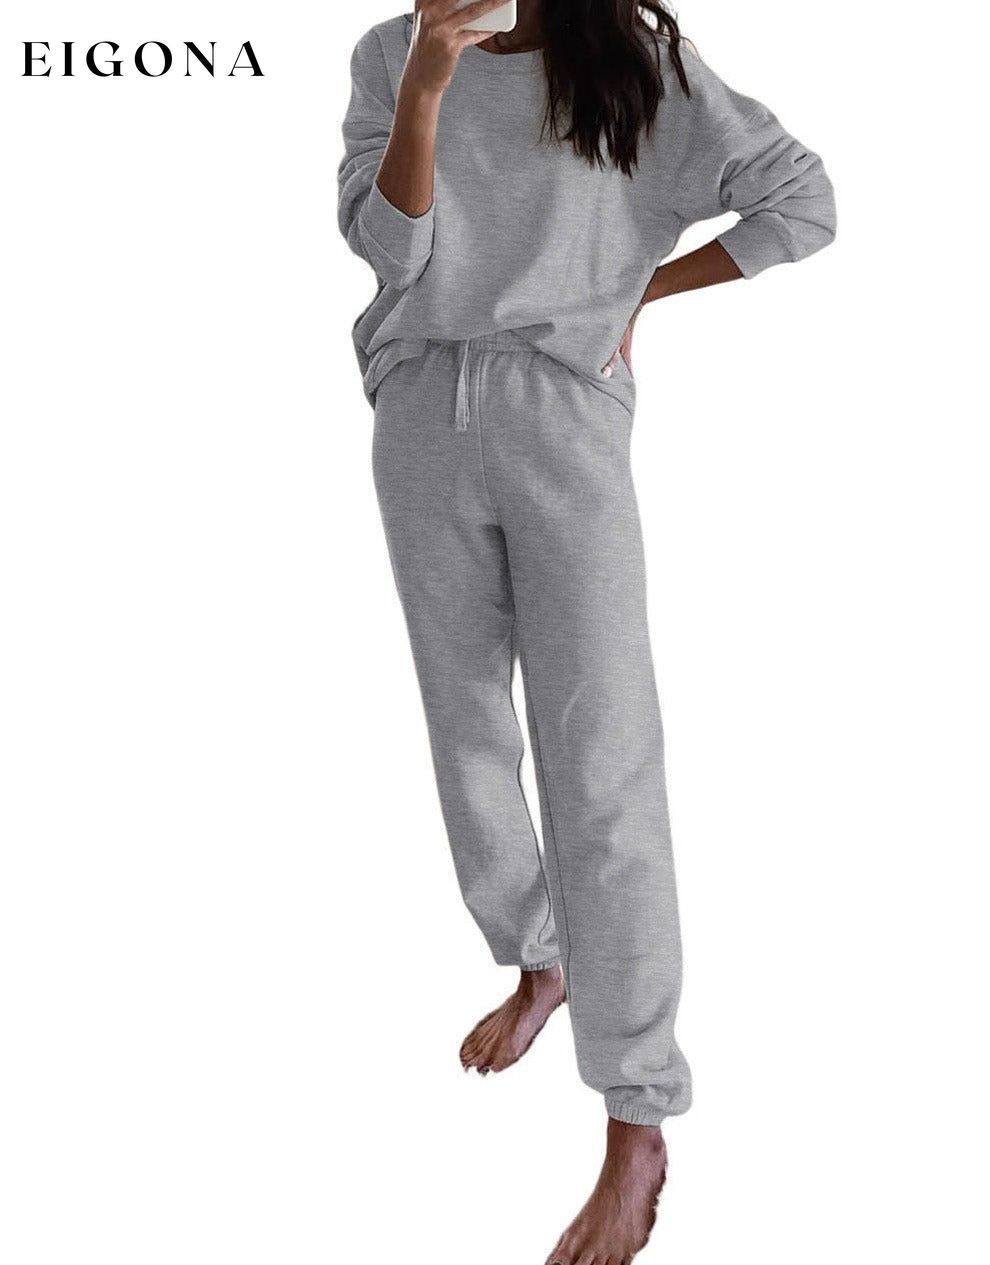 Gray Long Sleeve Top and Drawstring Pants Lounge Outfit (Includes top and bottoms) 2 piece lounge set All In Stock bottoms clothes EDM Monthly Recomend lounge lounge wear lounge wear sets loungewear loungewear sets Occasion Home pajamas Print Solid Color Season Winter sets Style Casual